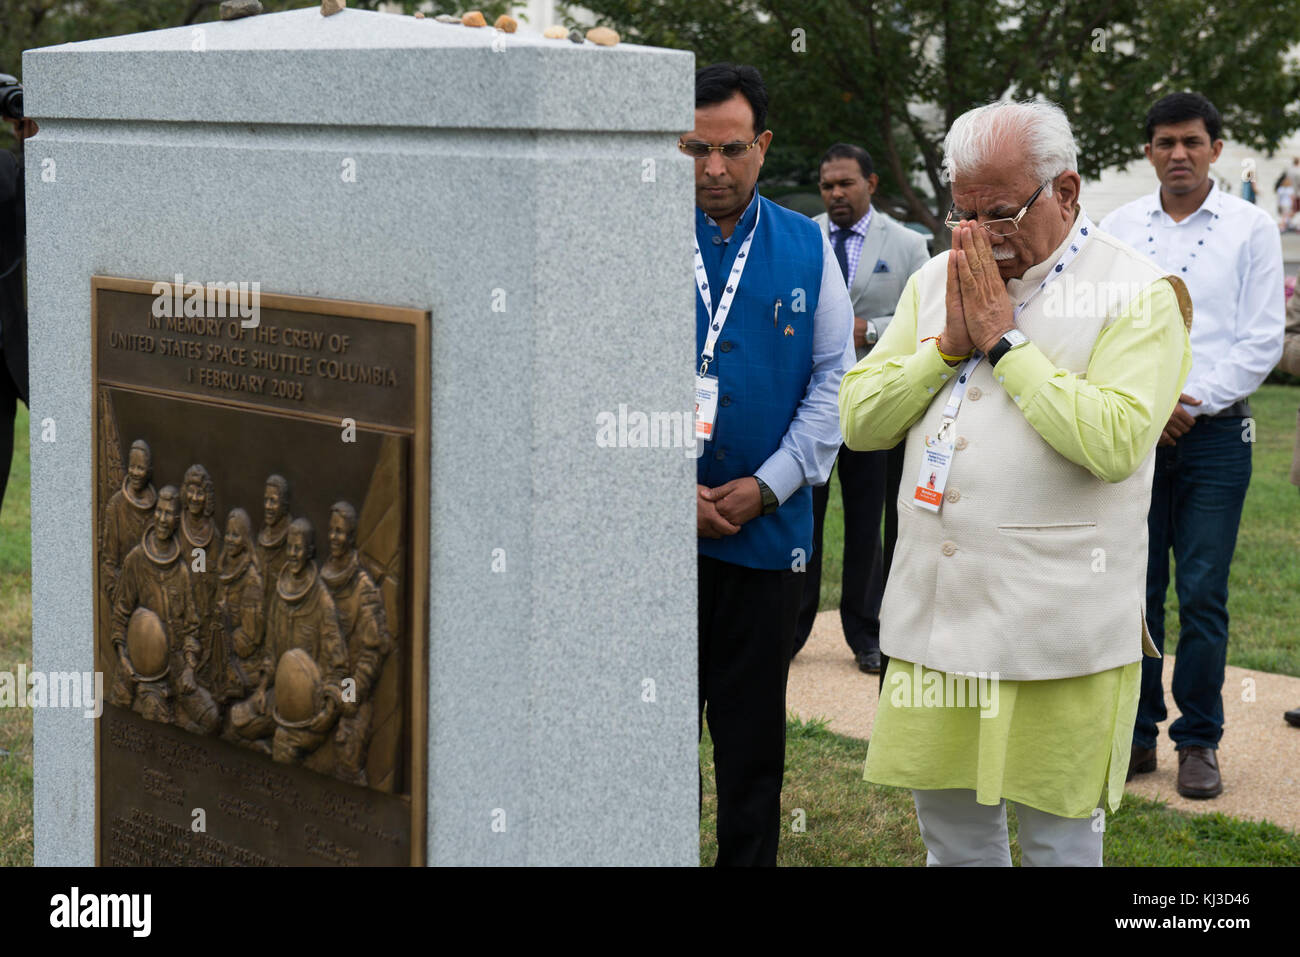 Chief Minister Manohar Lal Khattar takes part in a wreath-laying ceremony at the Space Shuttle Columbia Memorial (20500219770) Stock Photo